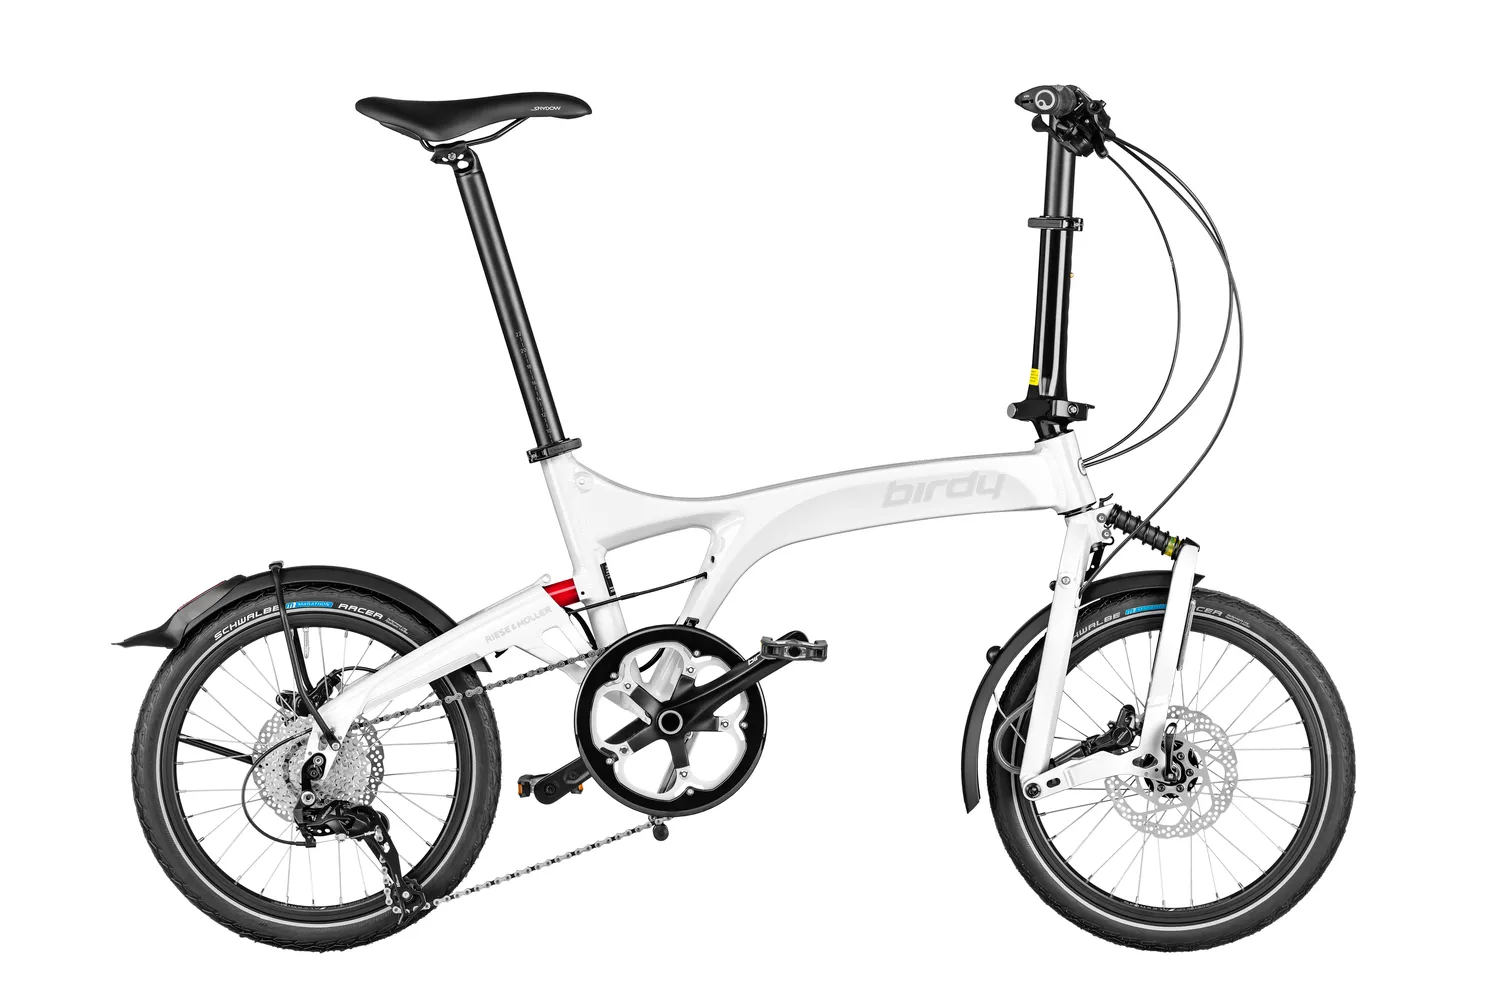 Riese & Müller Birdy touring in white with sport stem.